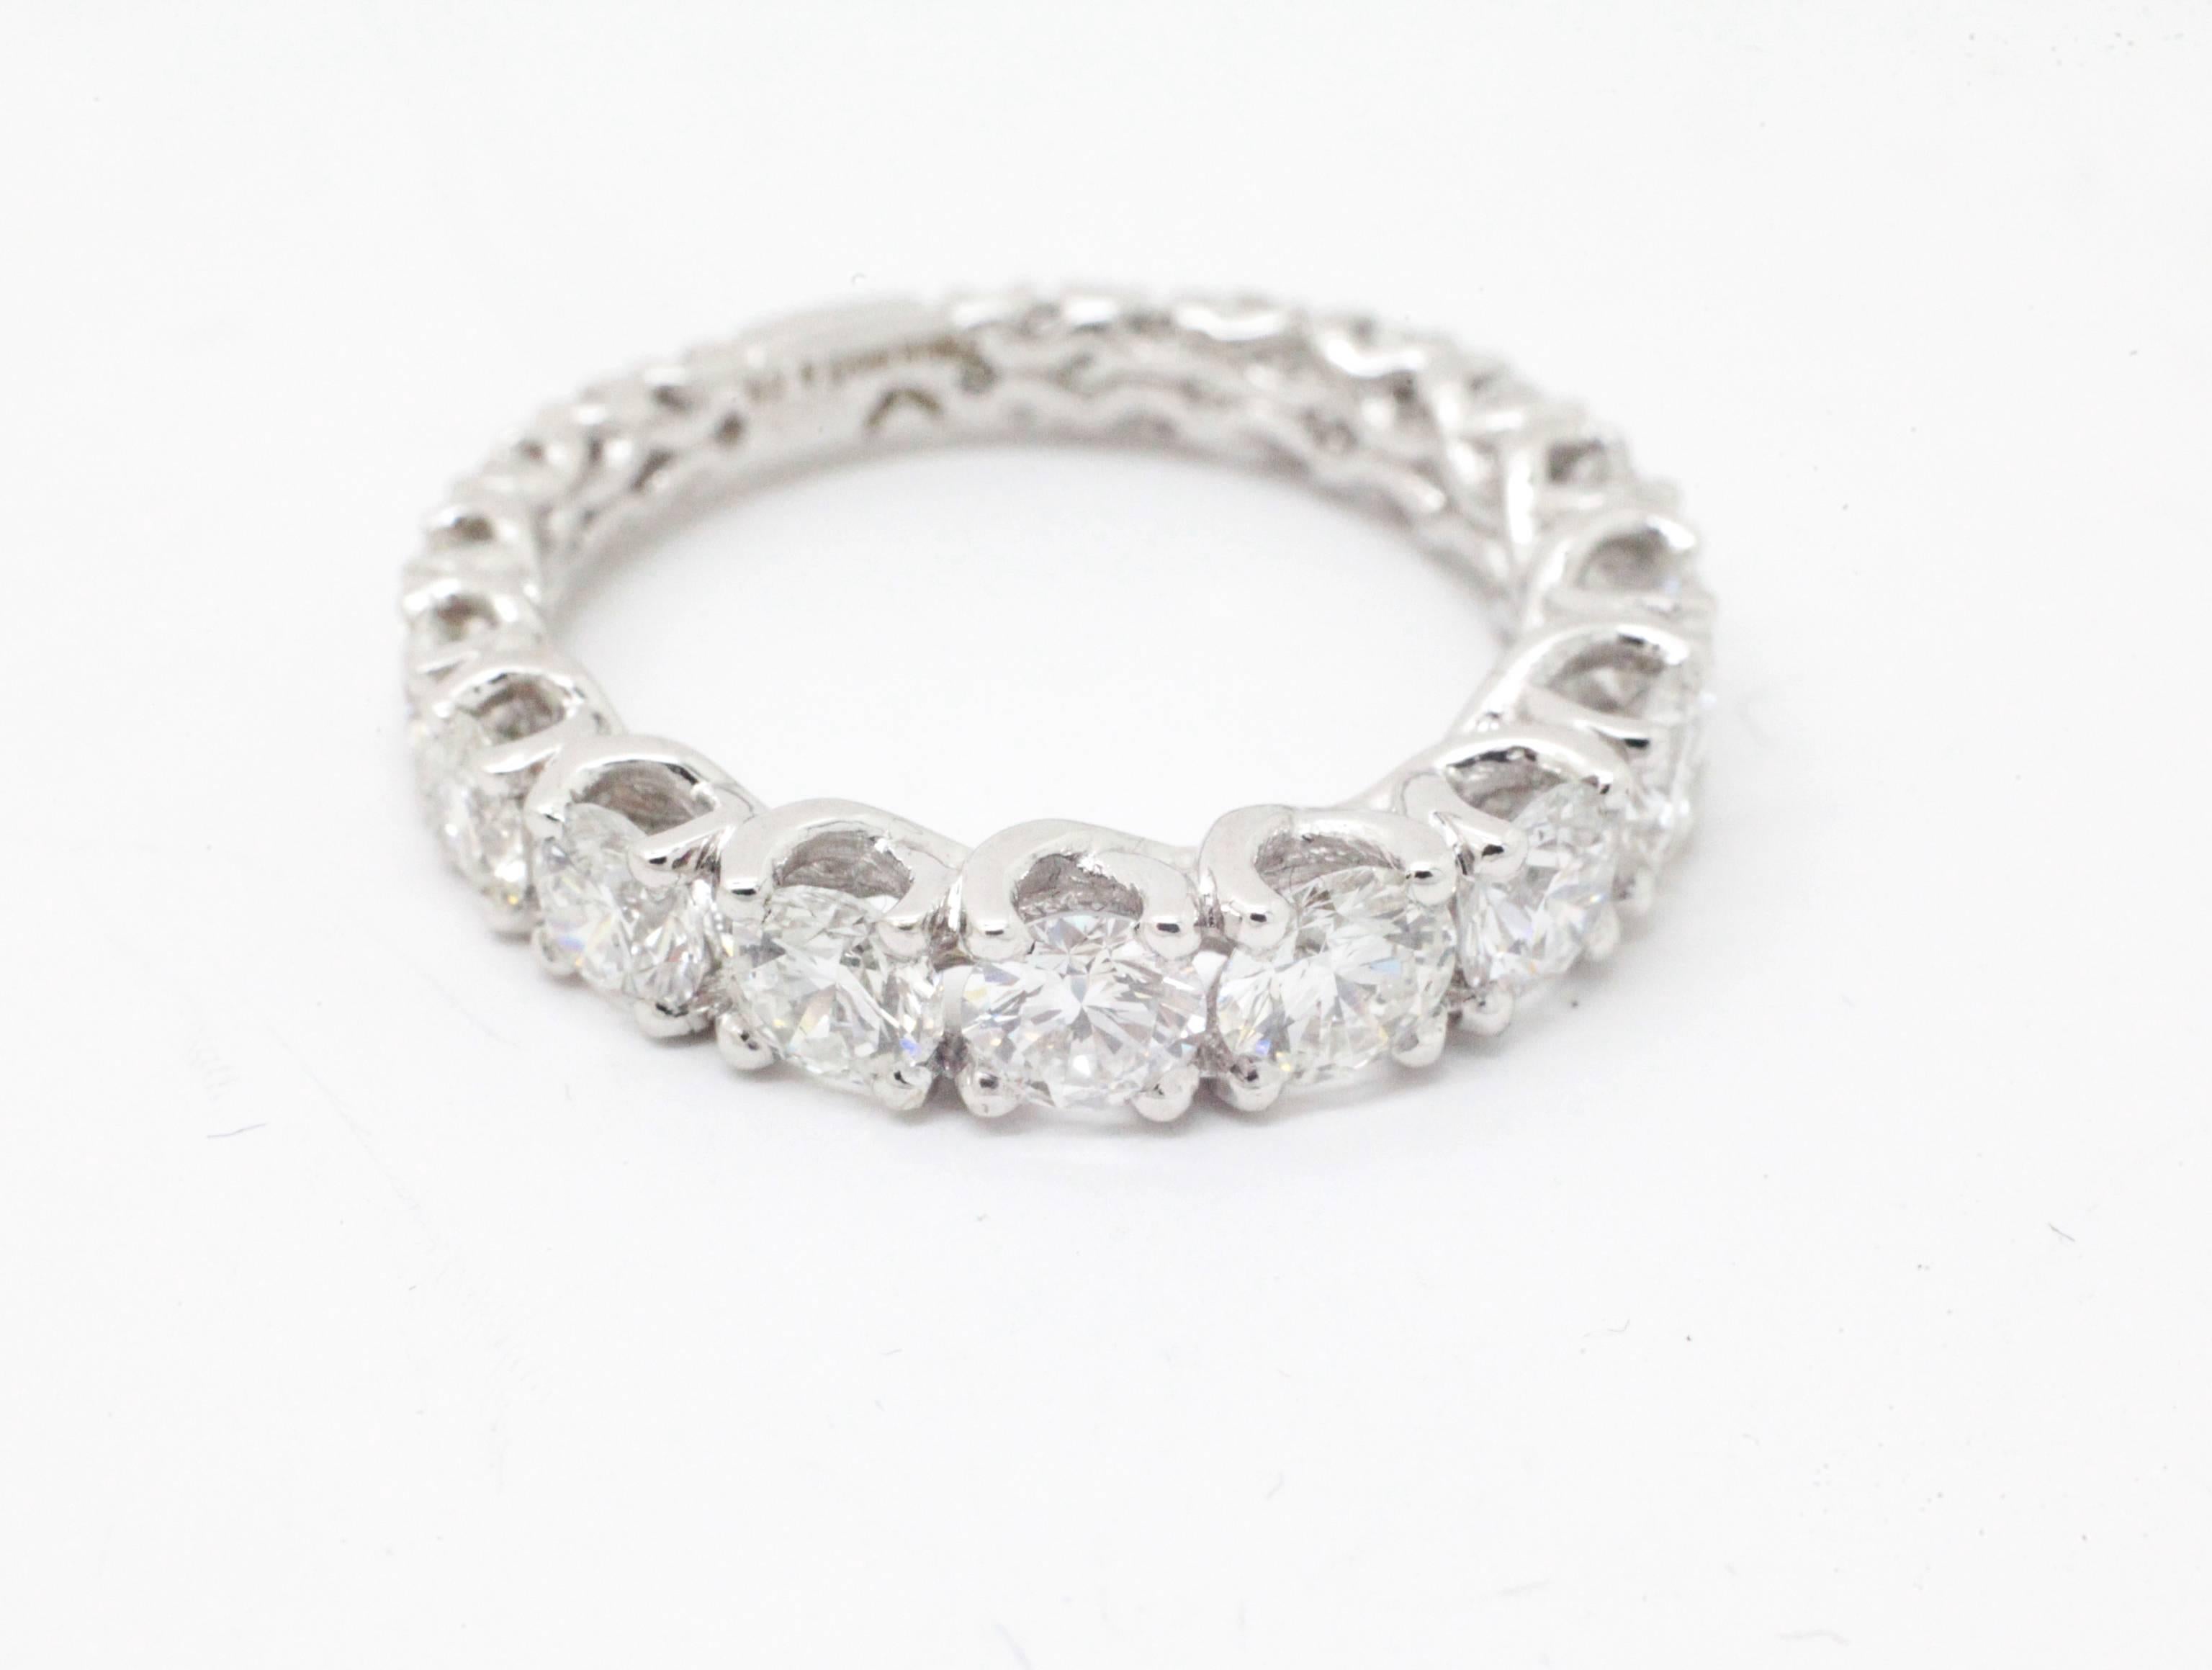 2.62 carat Eternity graduated ring in 18k white gold with an exquisite FERRUCCI prongs design, braided in the inside, delicate and fine look,
